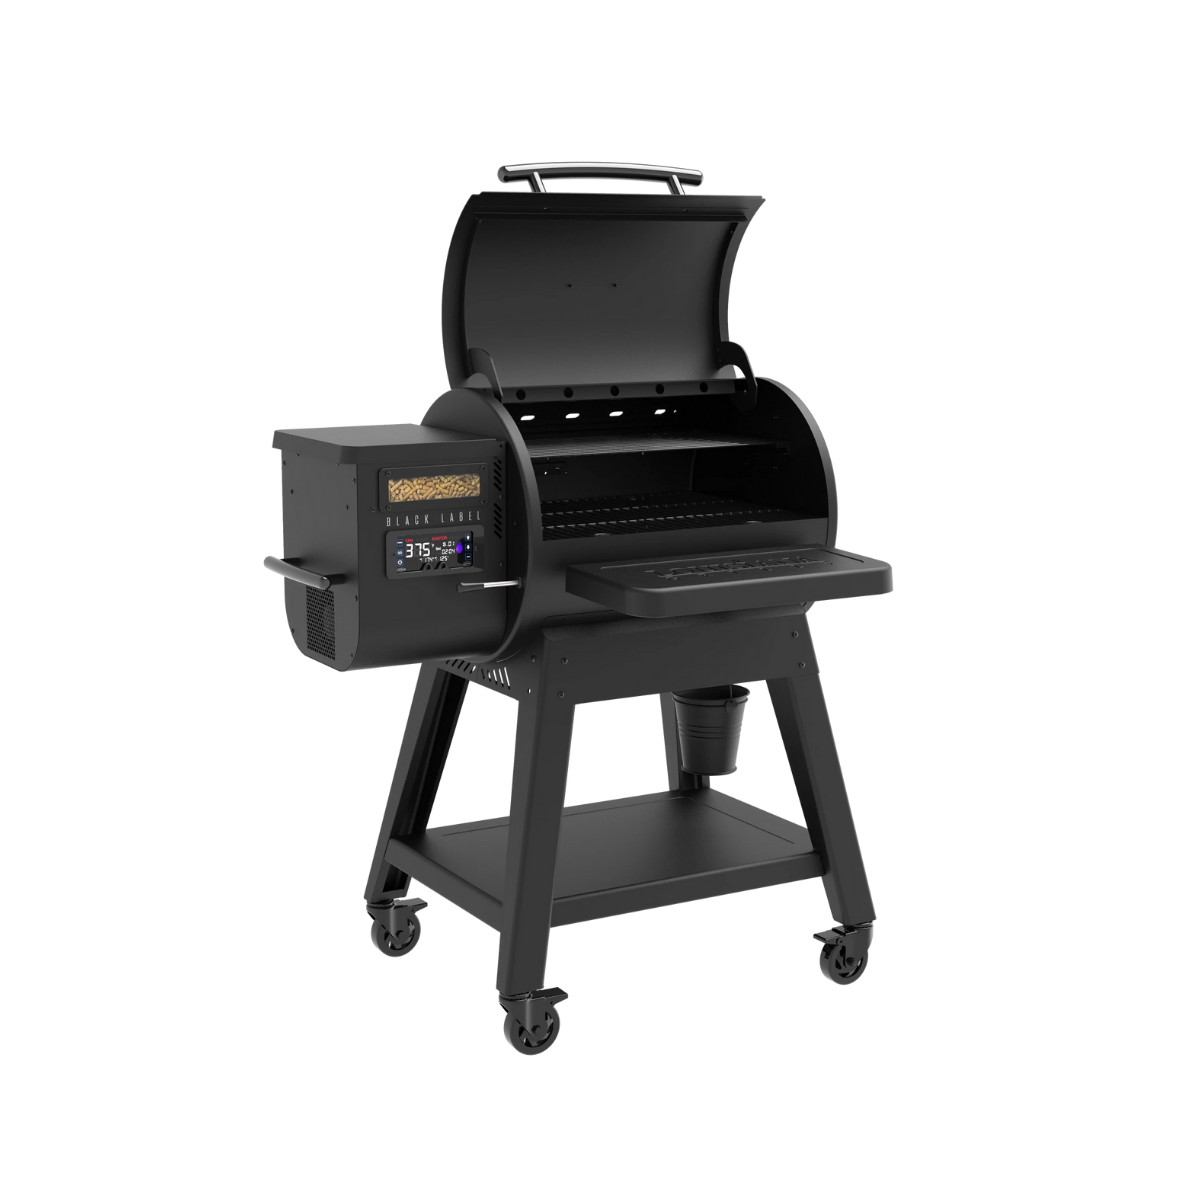 800 Black Label Series Grill With Wifi Control 1